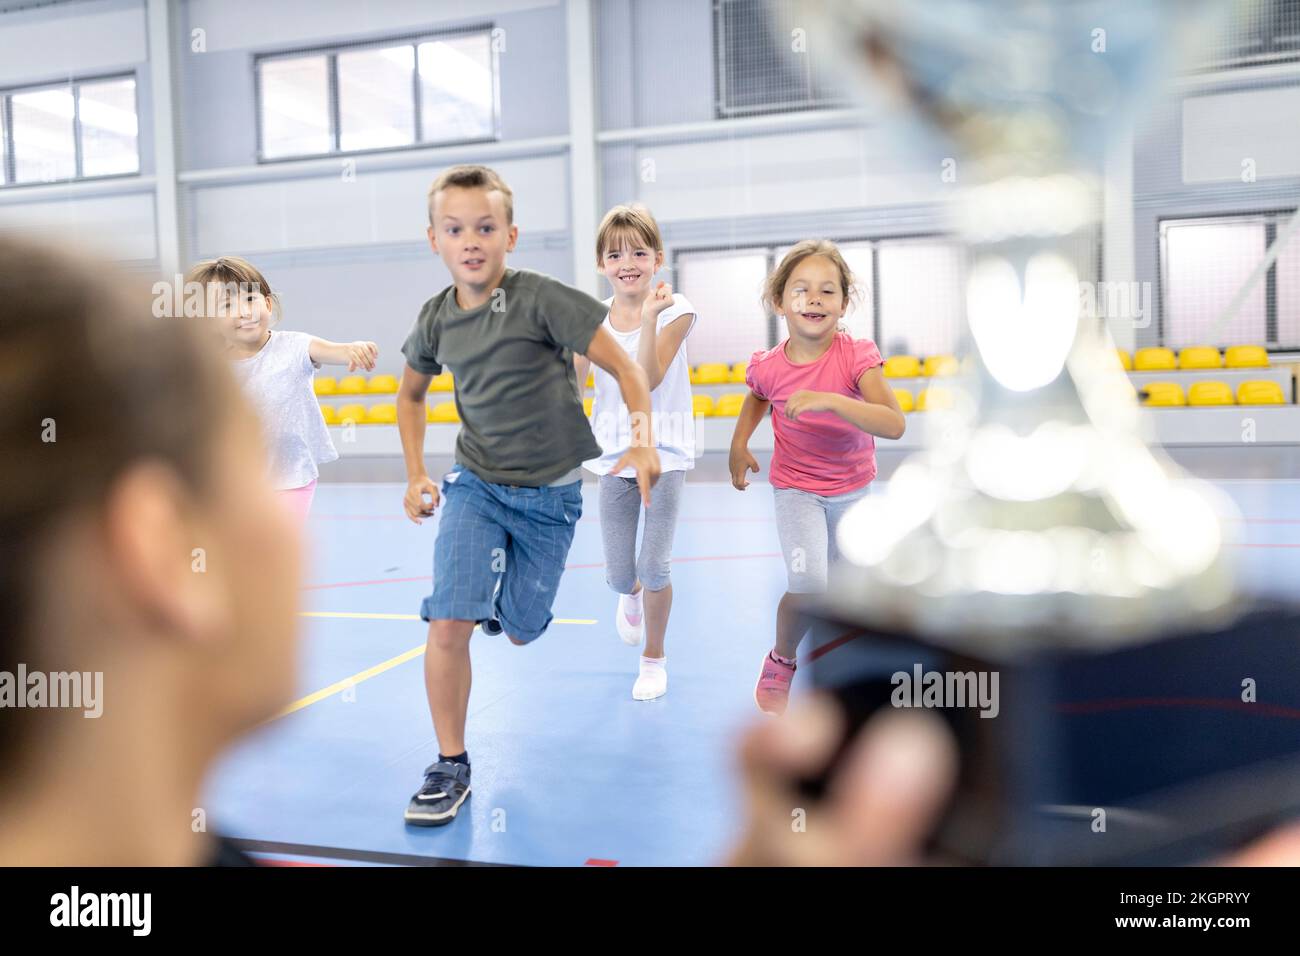 Excited students running towards trophy held by teacher at school sports court Stock Photo